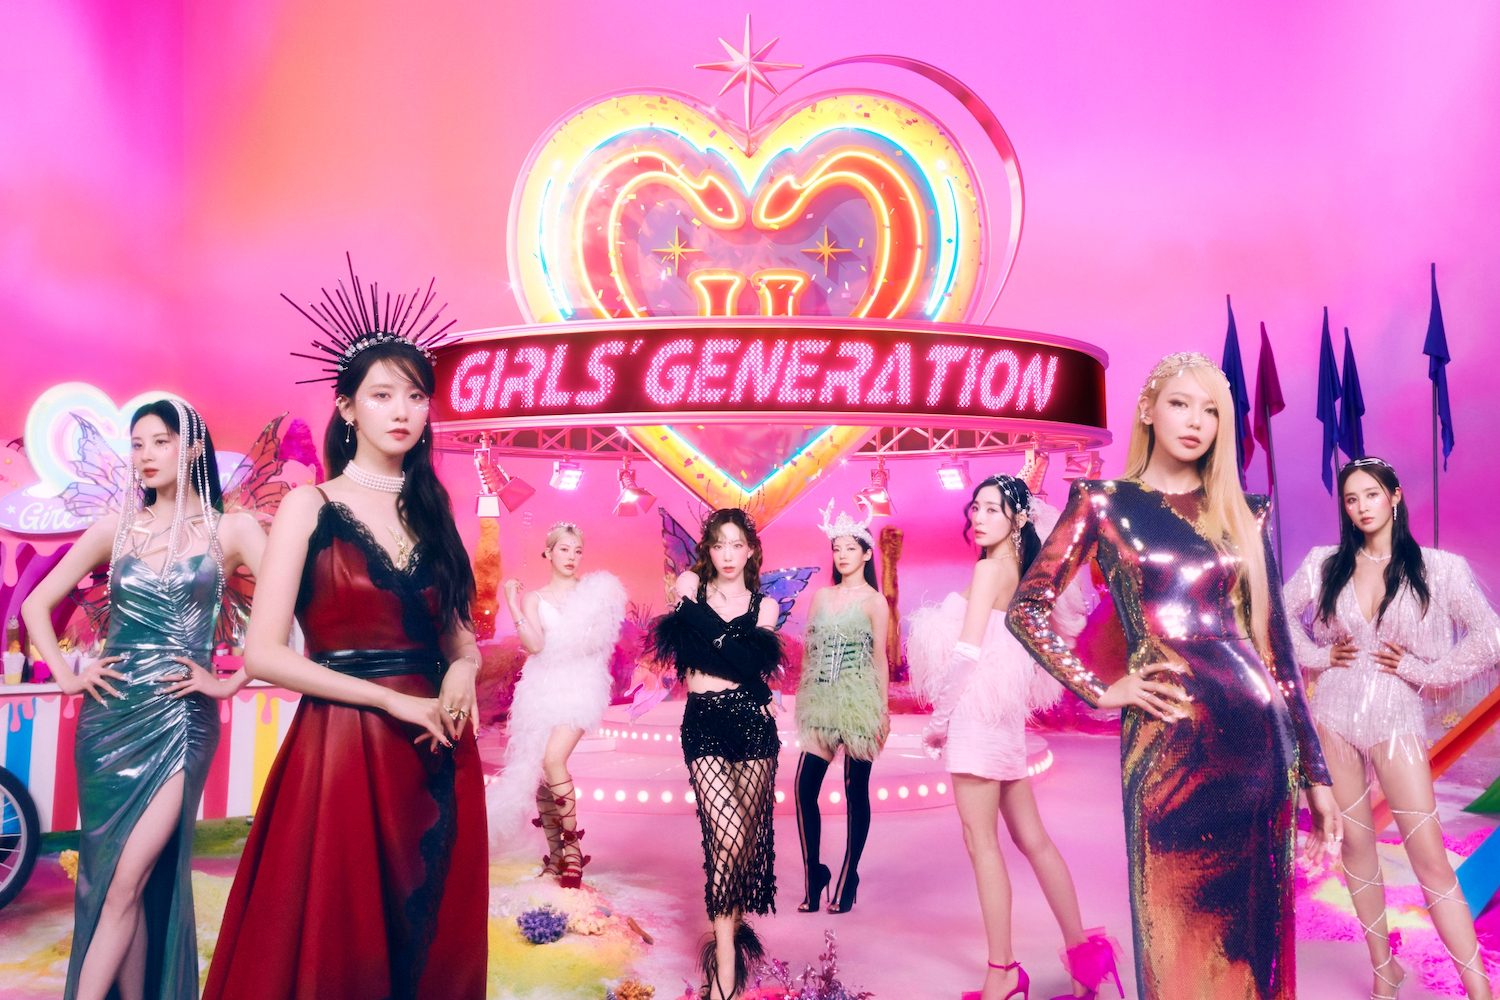 Have you listened to Forever 1? Here are the Girls’
Generation songs you need to hear next